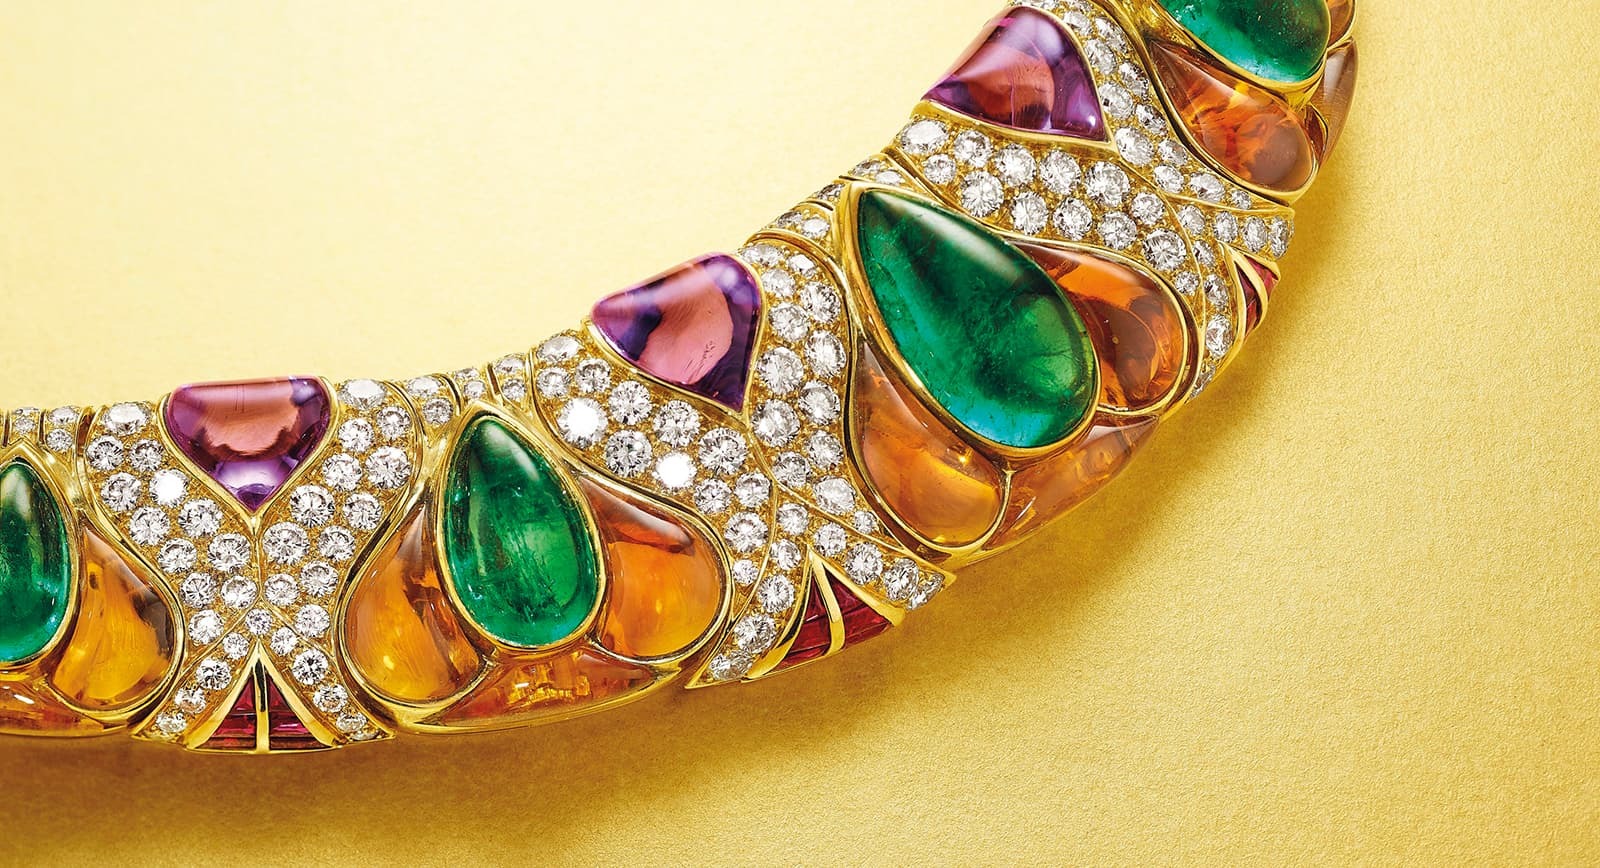 Bvlgari necklace with diamond and coloured gemstones that will be sold at Christie's auction in New York